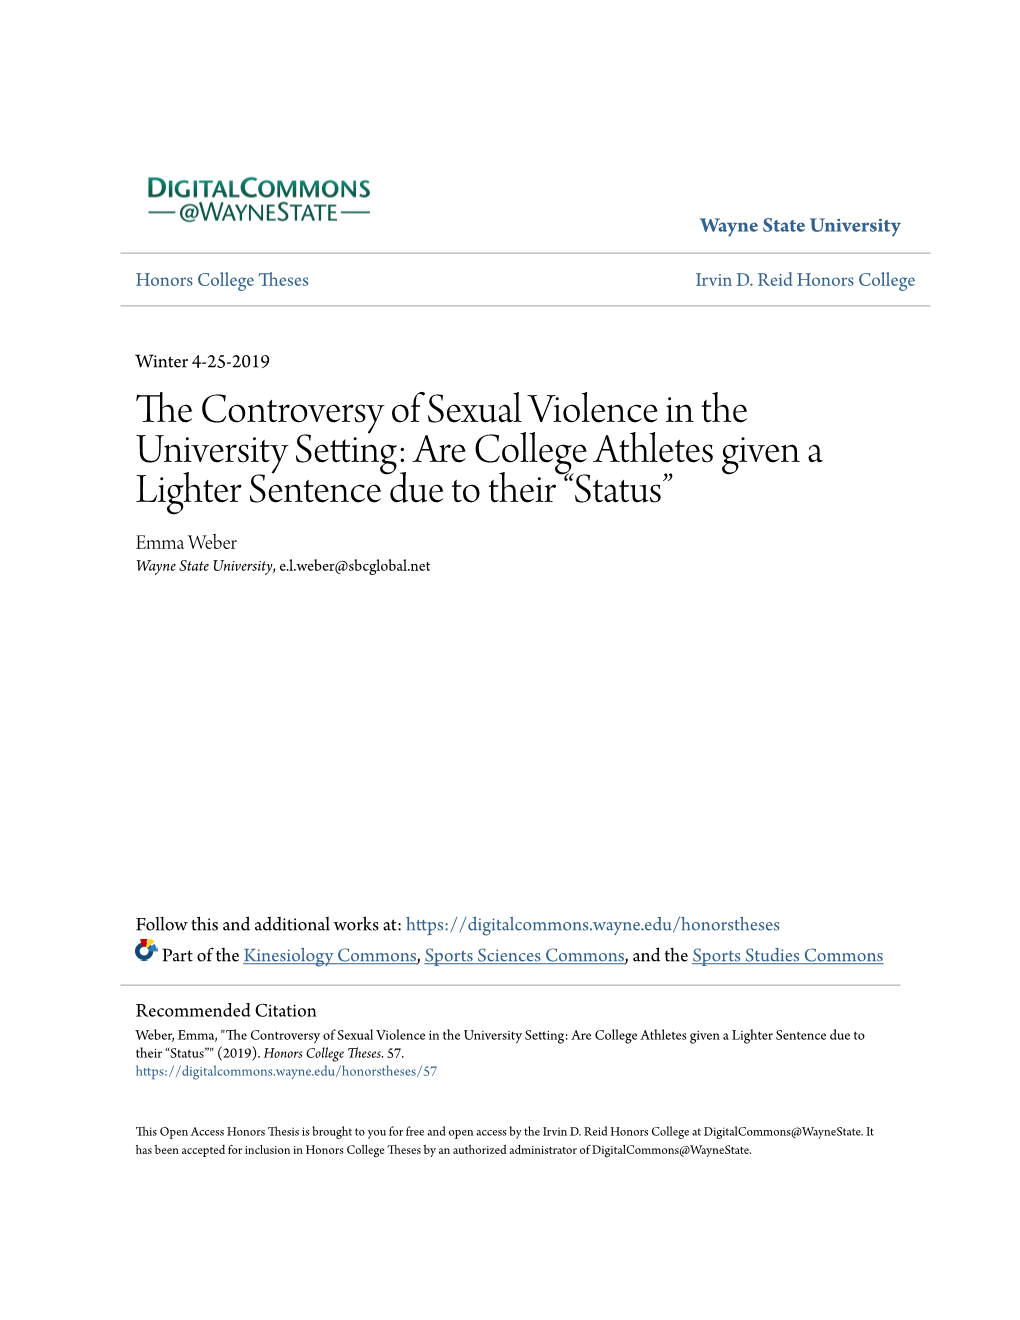 The Controversy of Sexual Violence in the University Setting: Are College